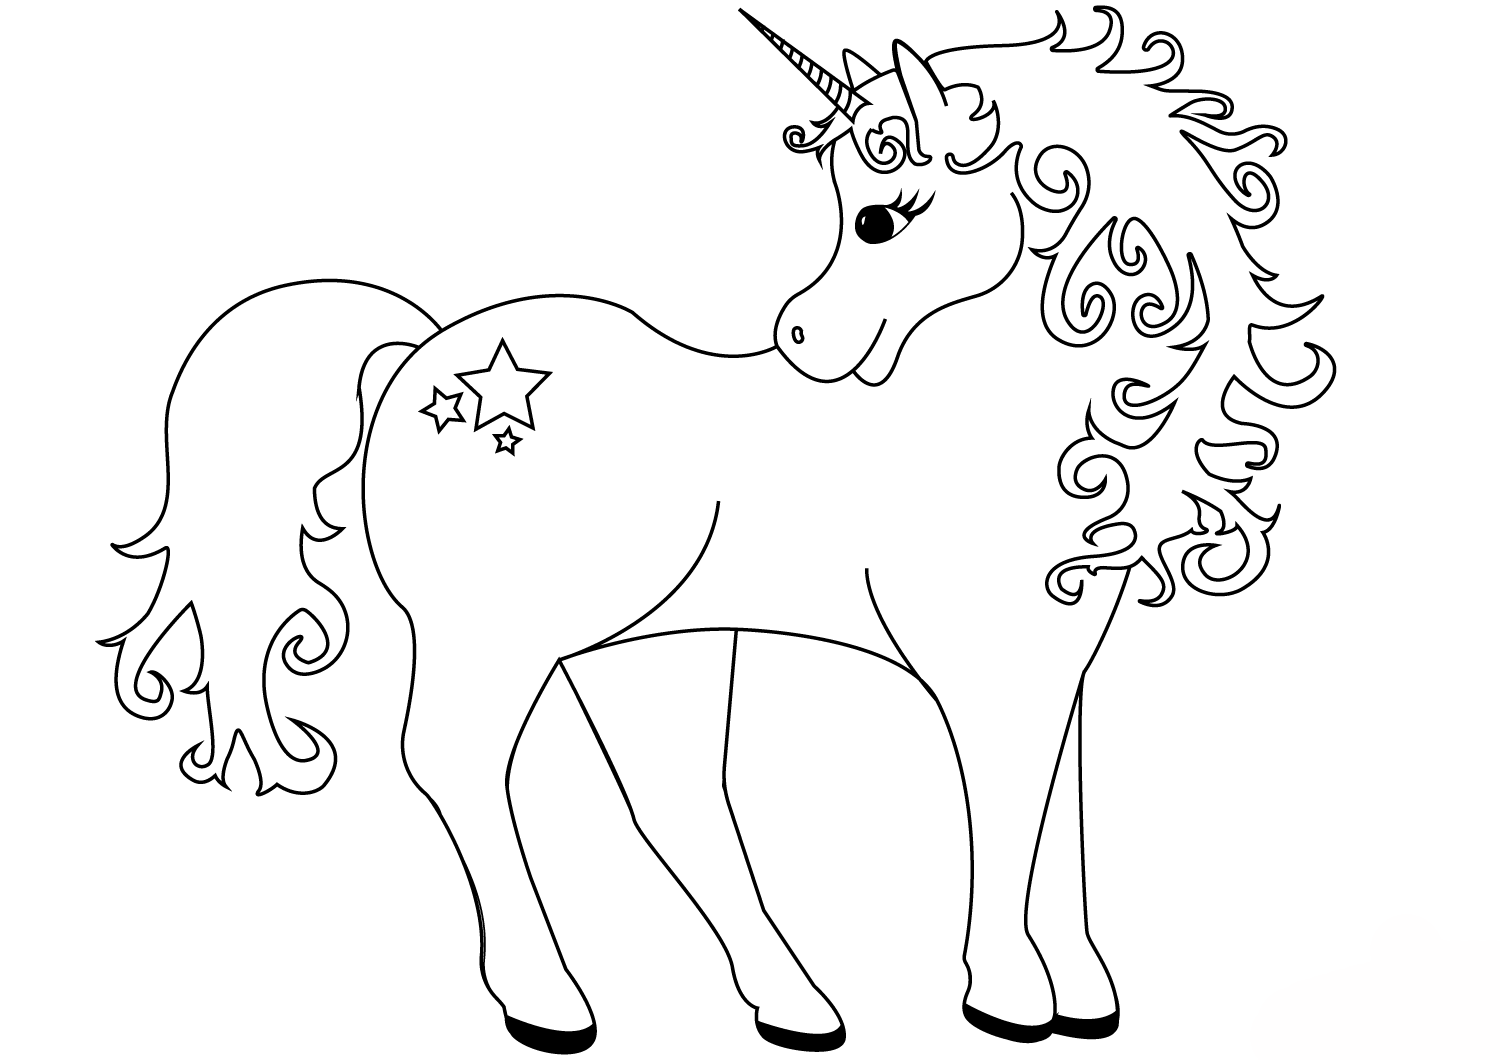 Unicorn free printable coloring pages - Colorpages.org